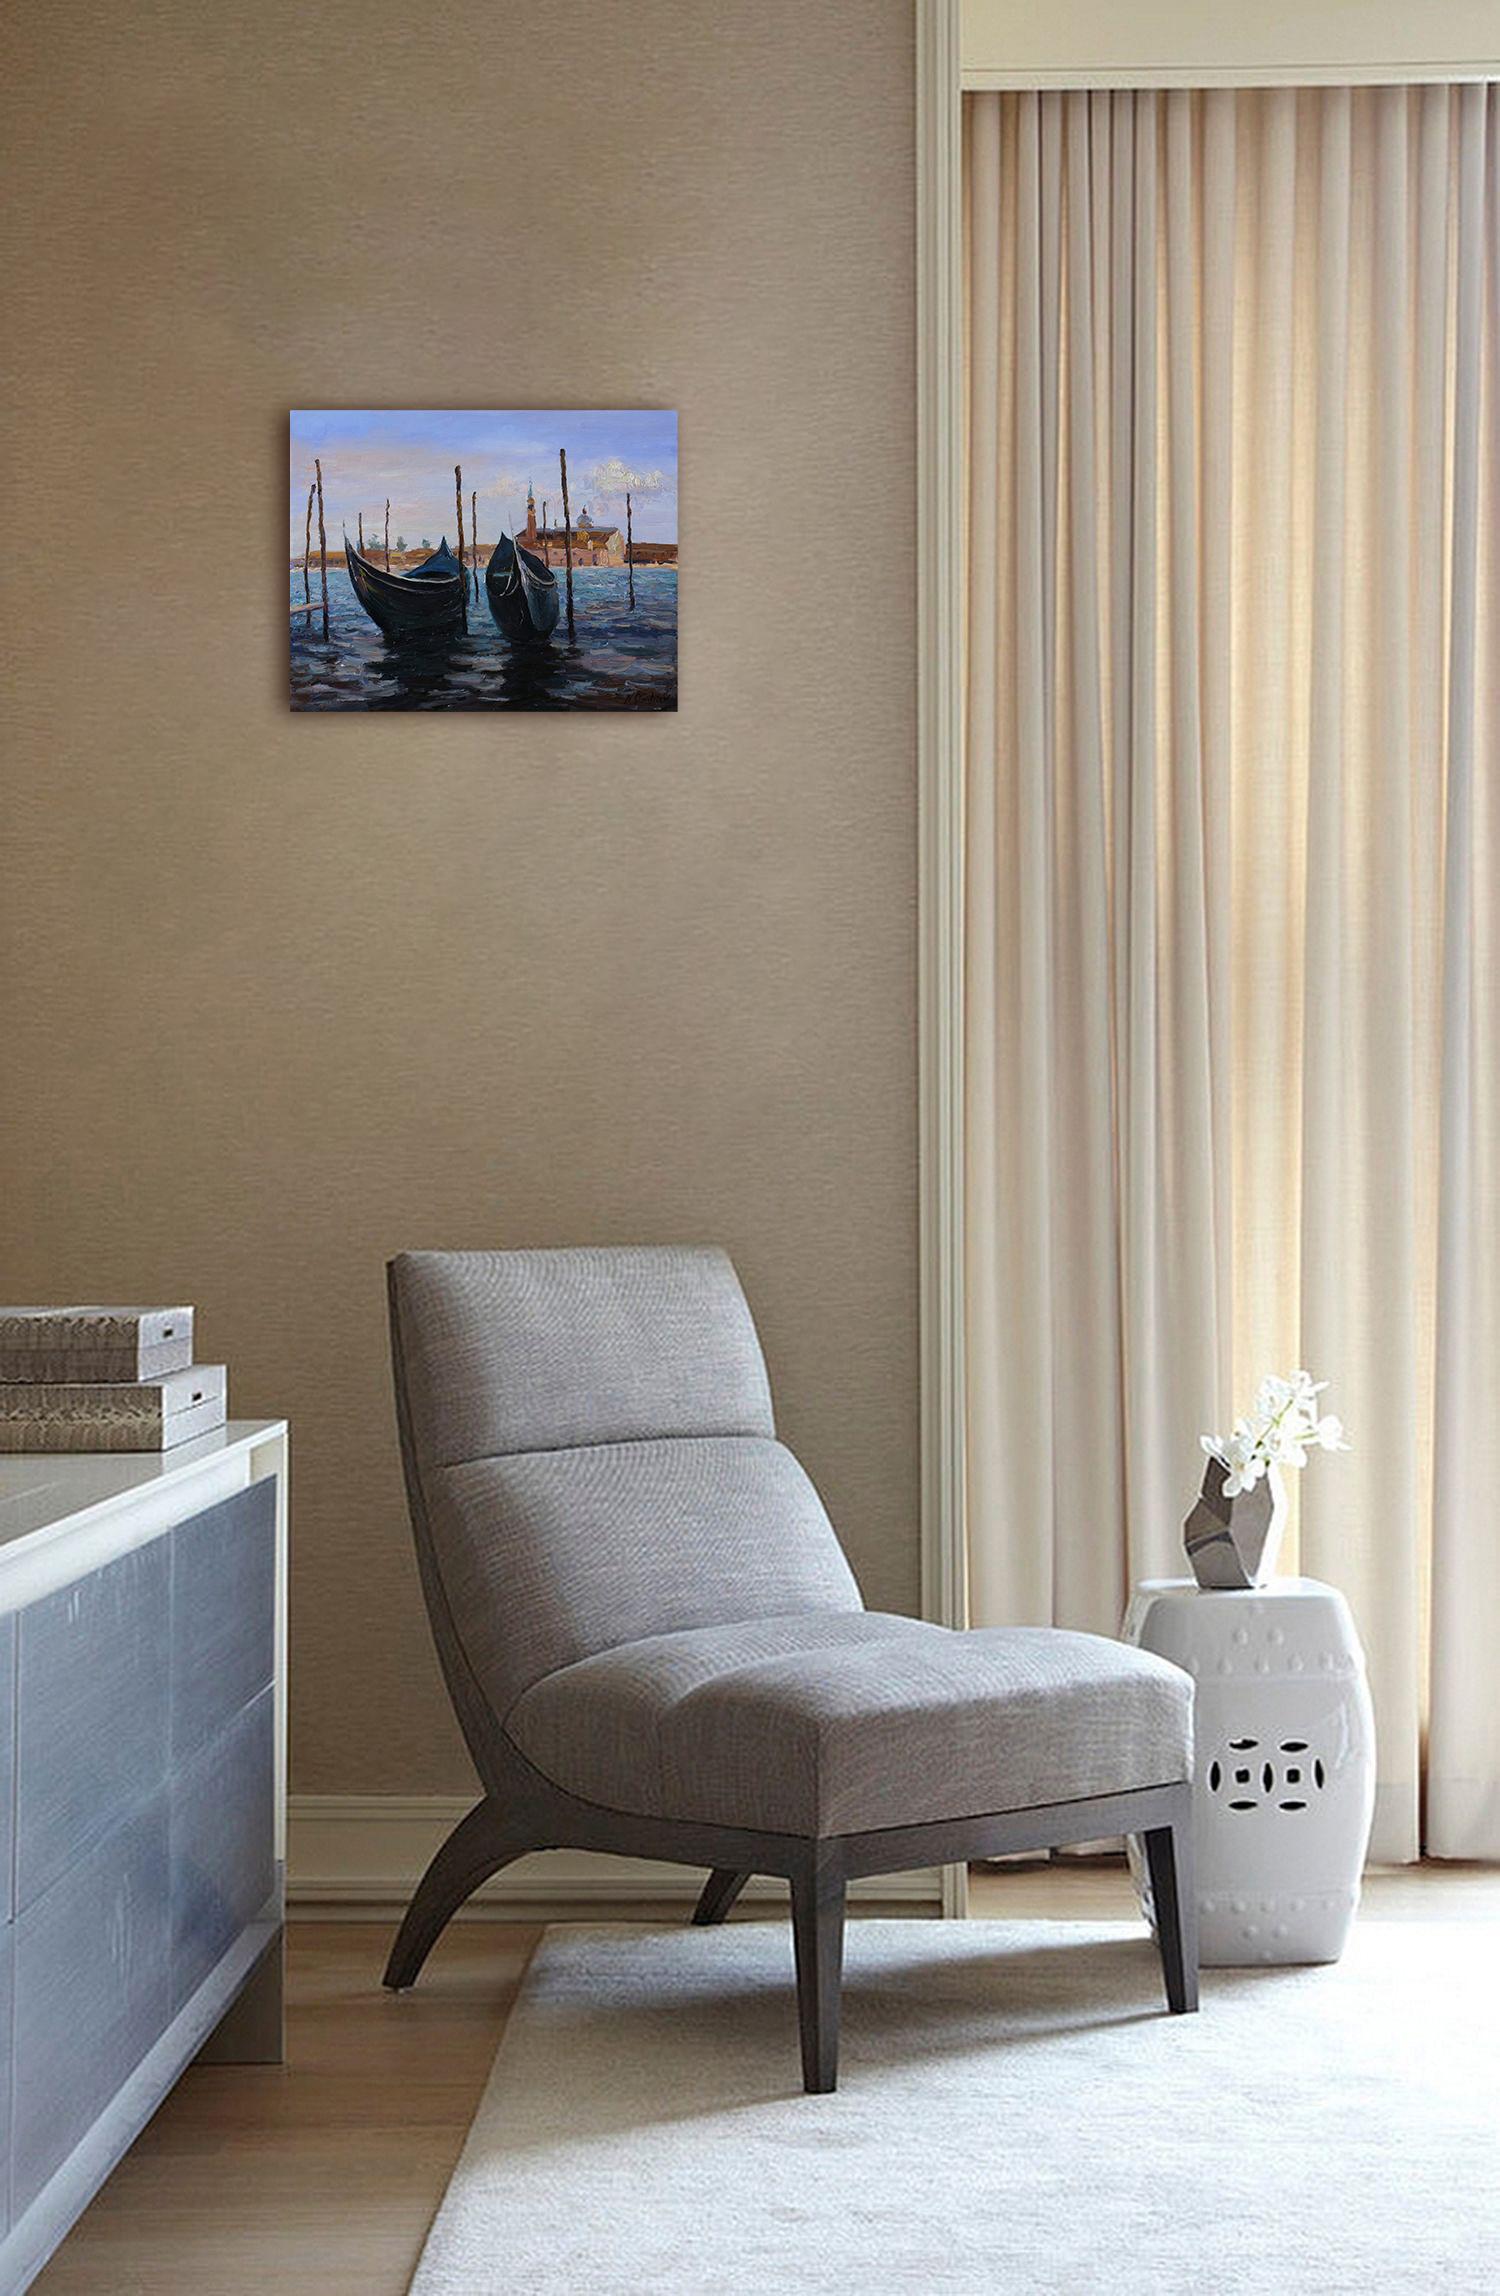 An impressionistic seascape with boats is created in technique impasto in blue colours, the contemporary Venetian landscape is a wonderful and stylish wall decor for your interior.
Venice is one of the most interesting and unusual cities of the